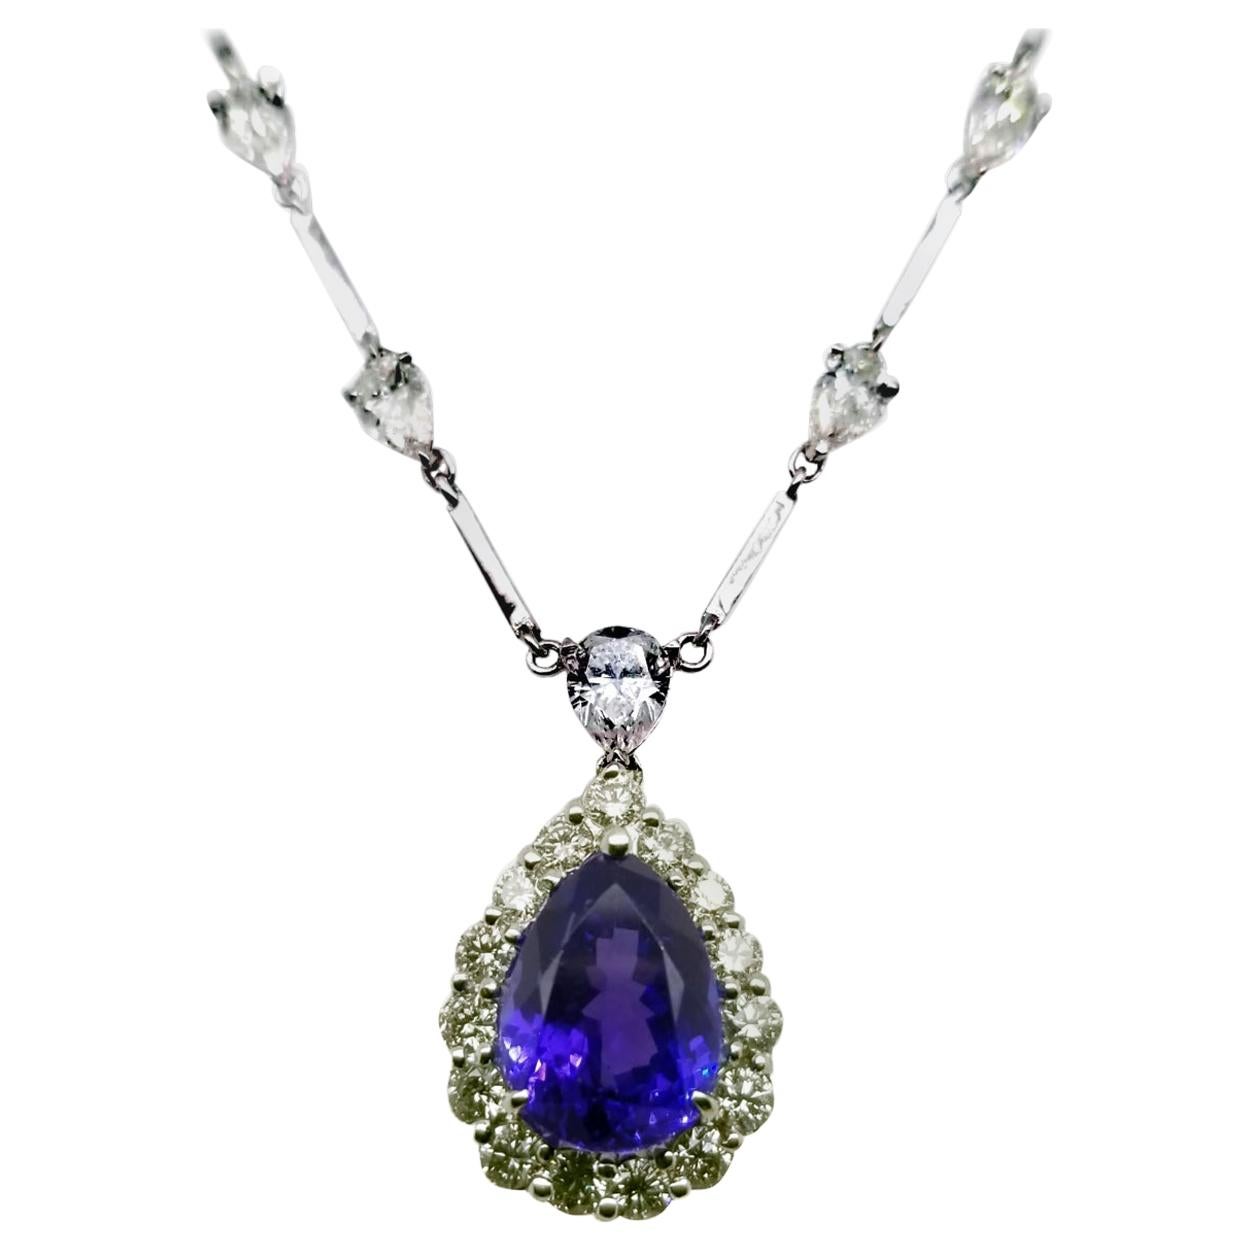 GIA Certified 5.87 Carat Pear Shape Tanzanite Necklace with 5.75 Carat Diamonds For Sale